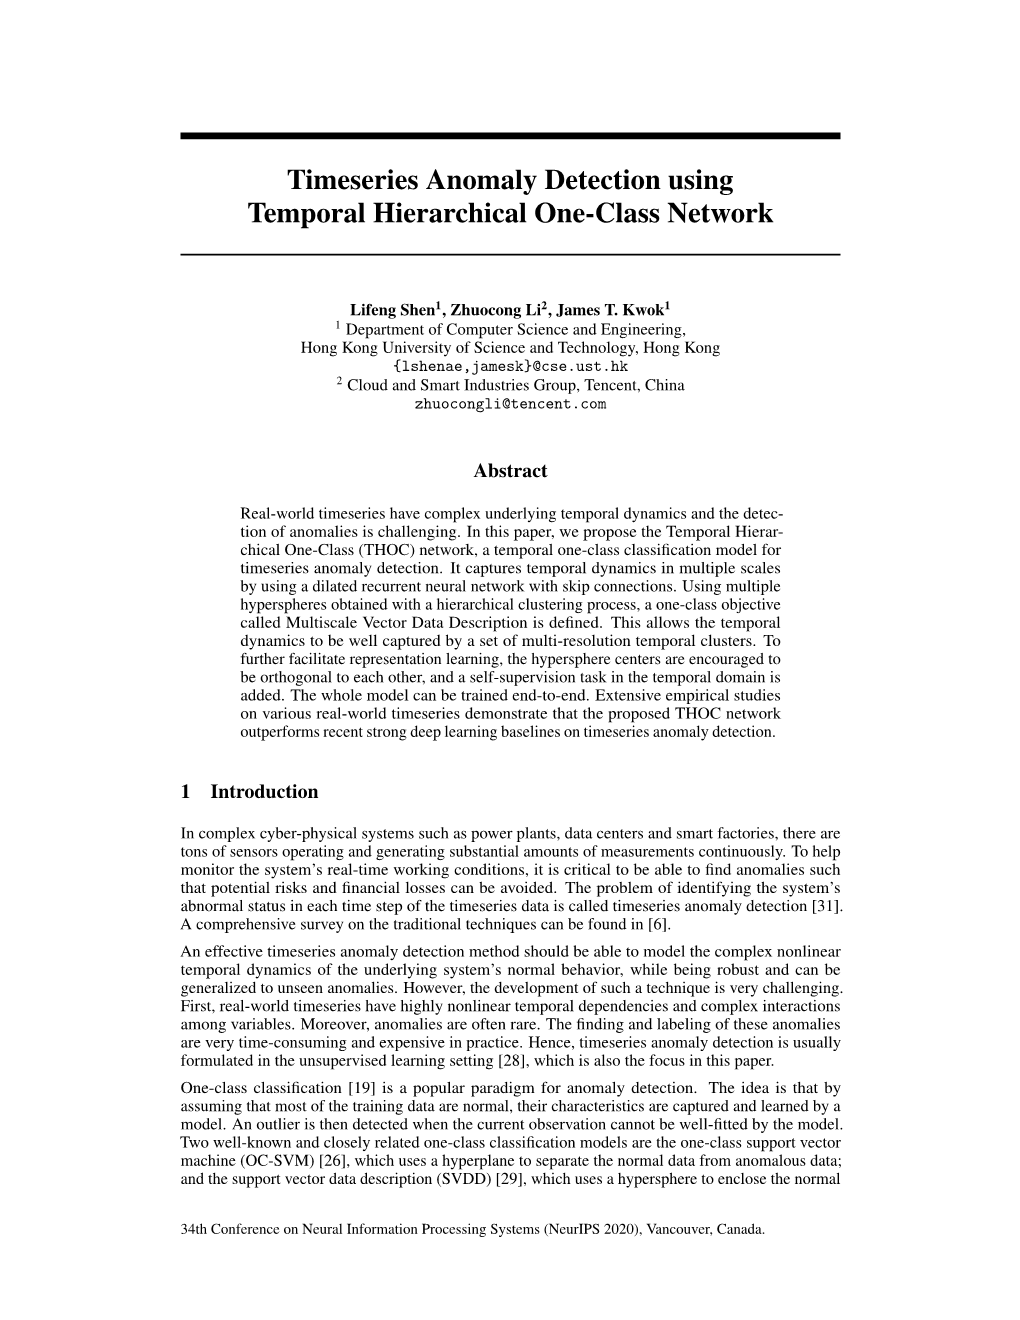 Timeseries Anomaly Detection Using Temporal Hierarchical One-Class Network